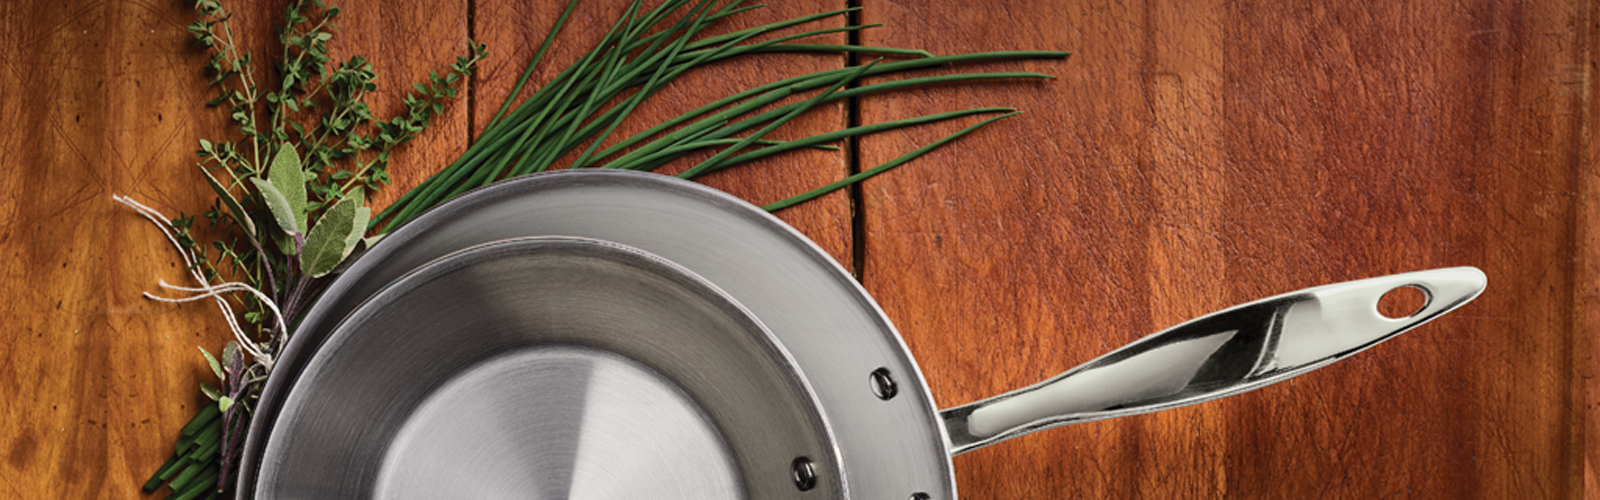 All-Clad Collective d5 Stainless-Steel Frying Pan